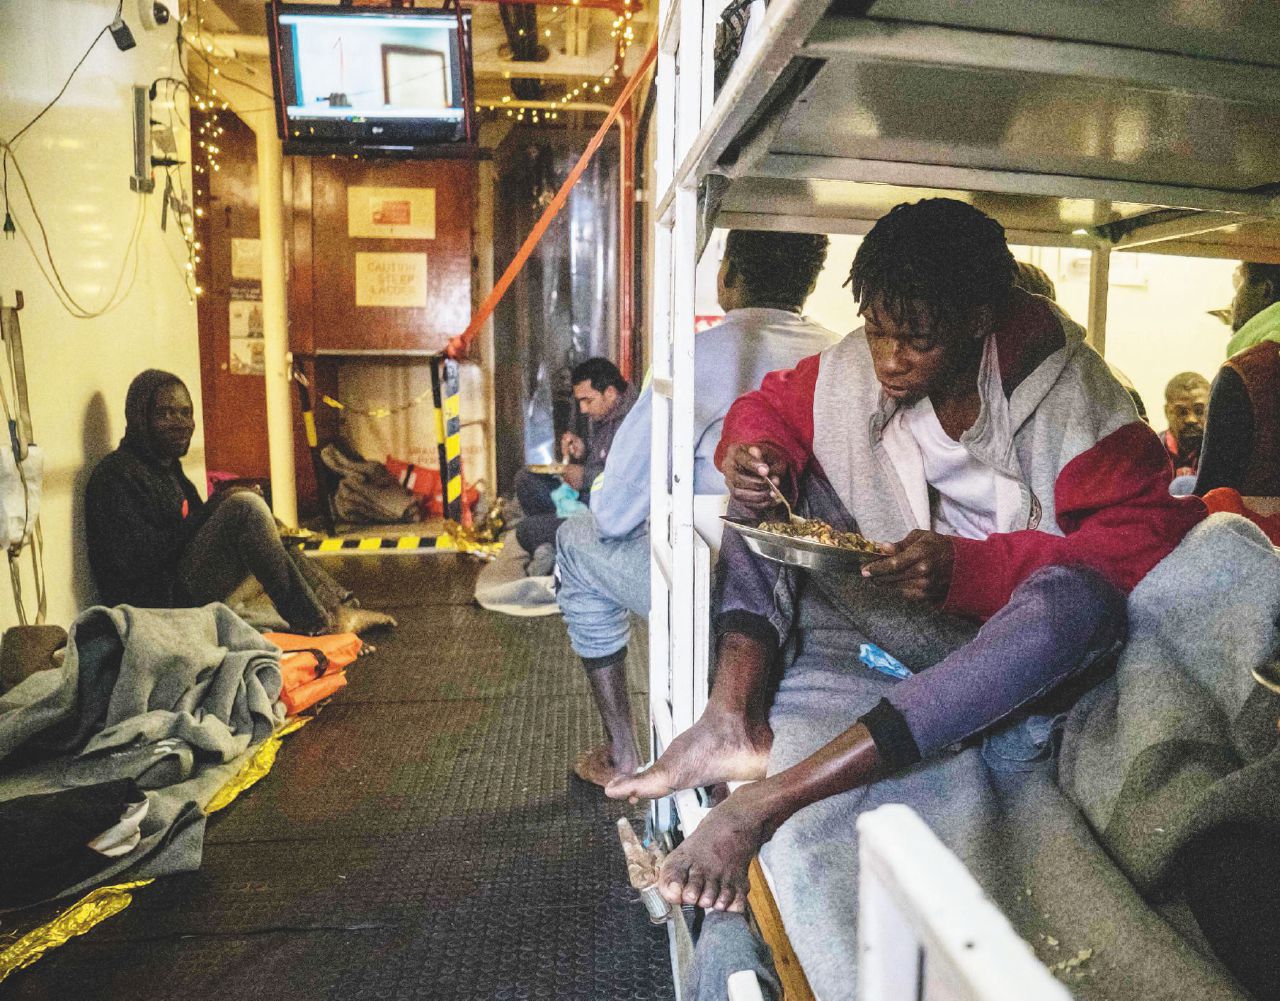 Rescued migrants eat a hot meal onboard the Dutch-flagged rescue vessel Sea Watch 3 on January 5, 2019, sailing the Mediterranean about 3 nautical miles off Malta's coast, a day after Mediterranea and Sea-Watch launched two boats to deliver supplies, including fresh water. - Thirty-two migrants, including children and teenagers rescued off Malta by a Sea-Watch rescue boat on December 22, 2018 remain at sea after being denied entry to European ports. The boat was given permission by Malta on January 3 to shelter off its coast due to a storm and fierce winds, but not to land. (Photo by FEDERICO SCOPPA / AFP)